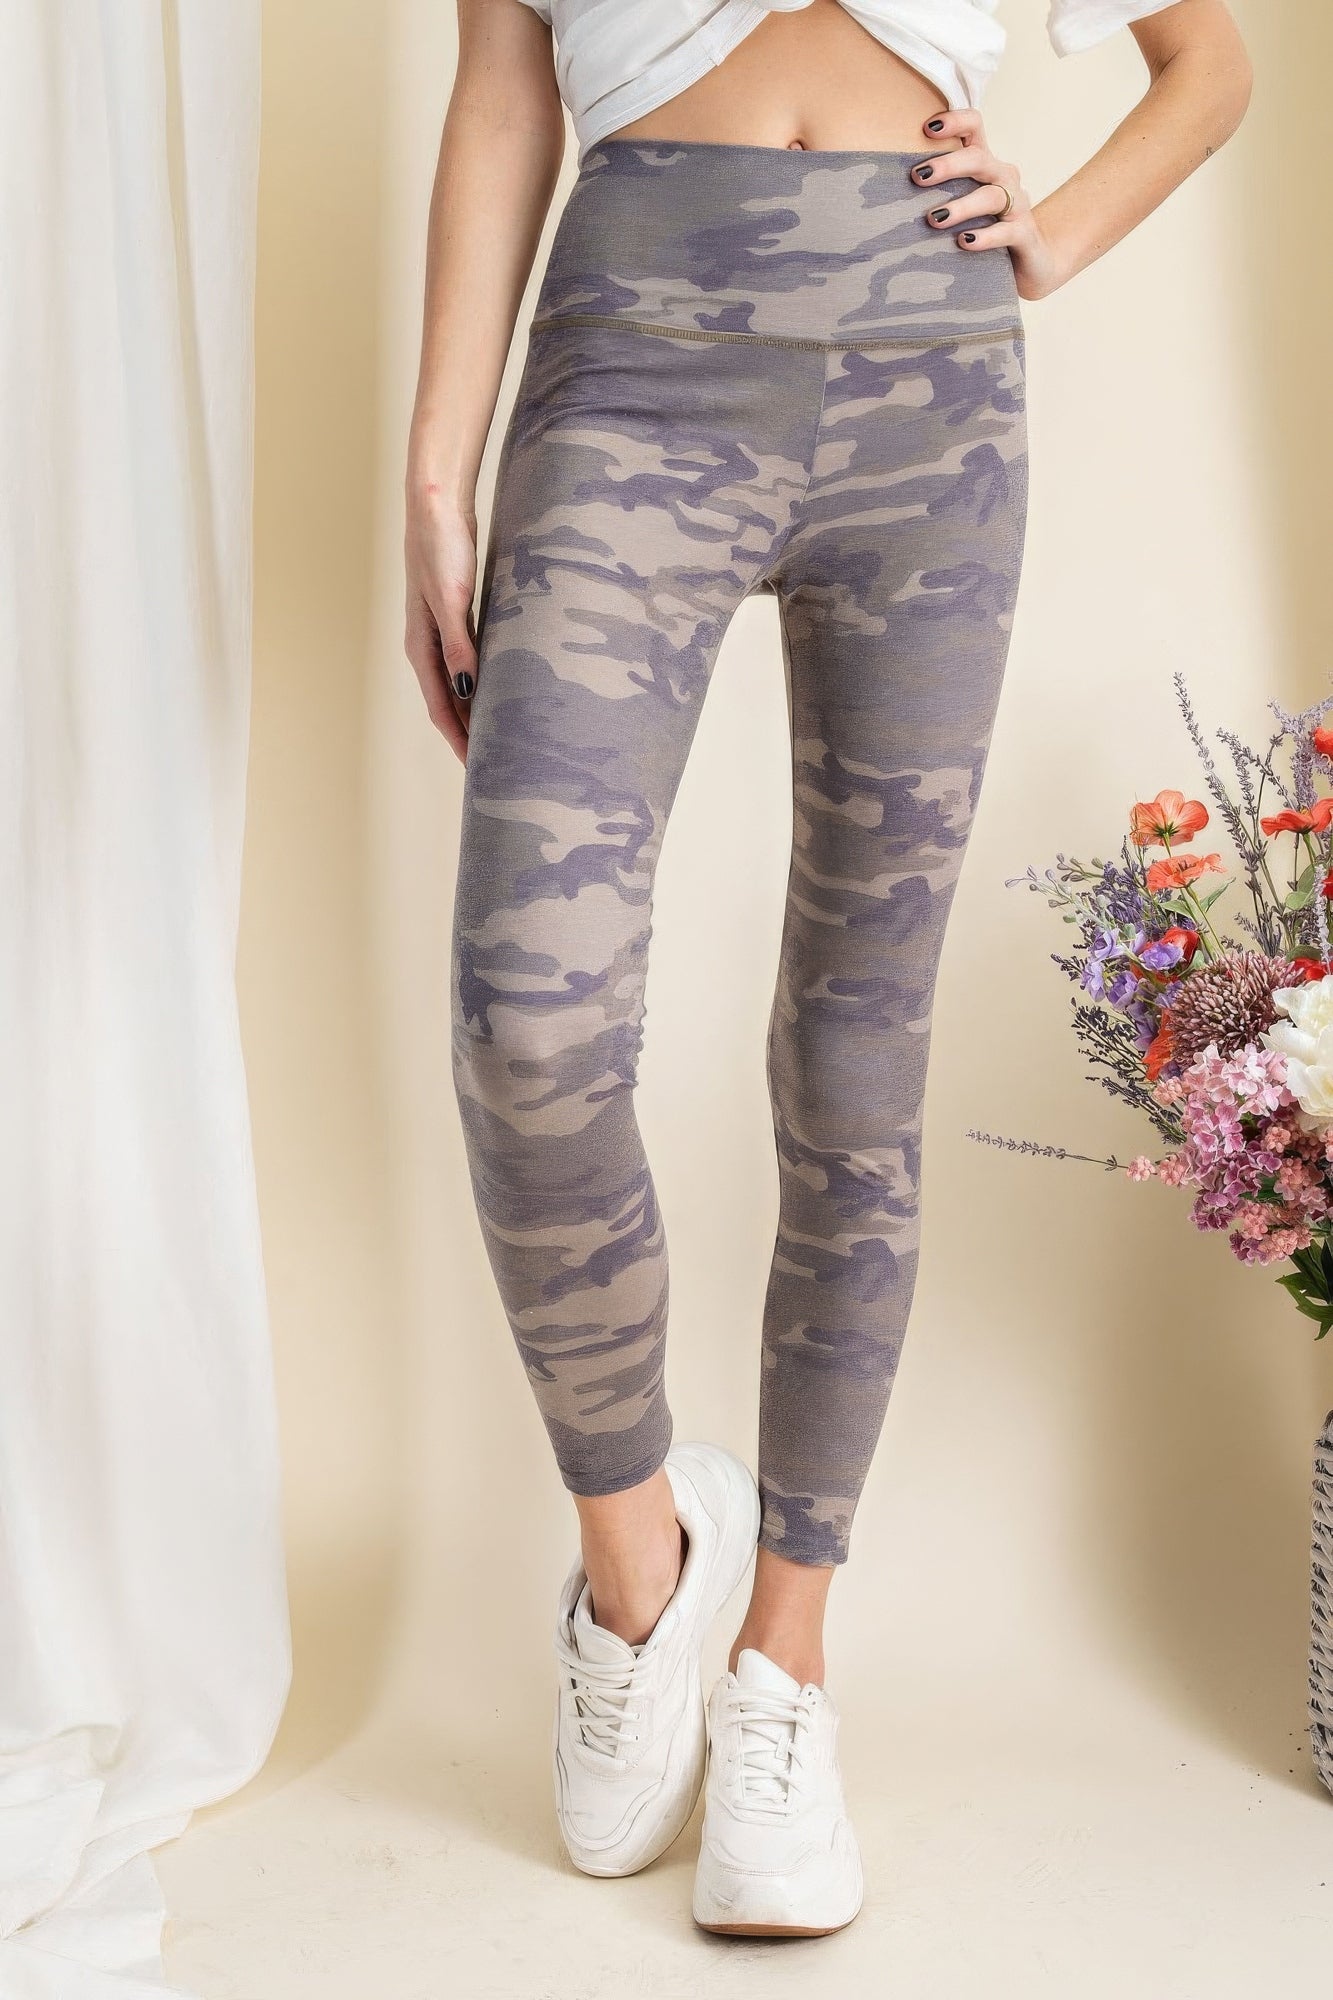 THE CAMI Camouflage Printed Rayon Spandex Leggings